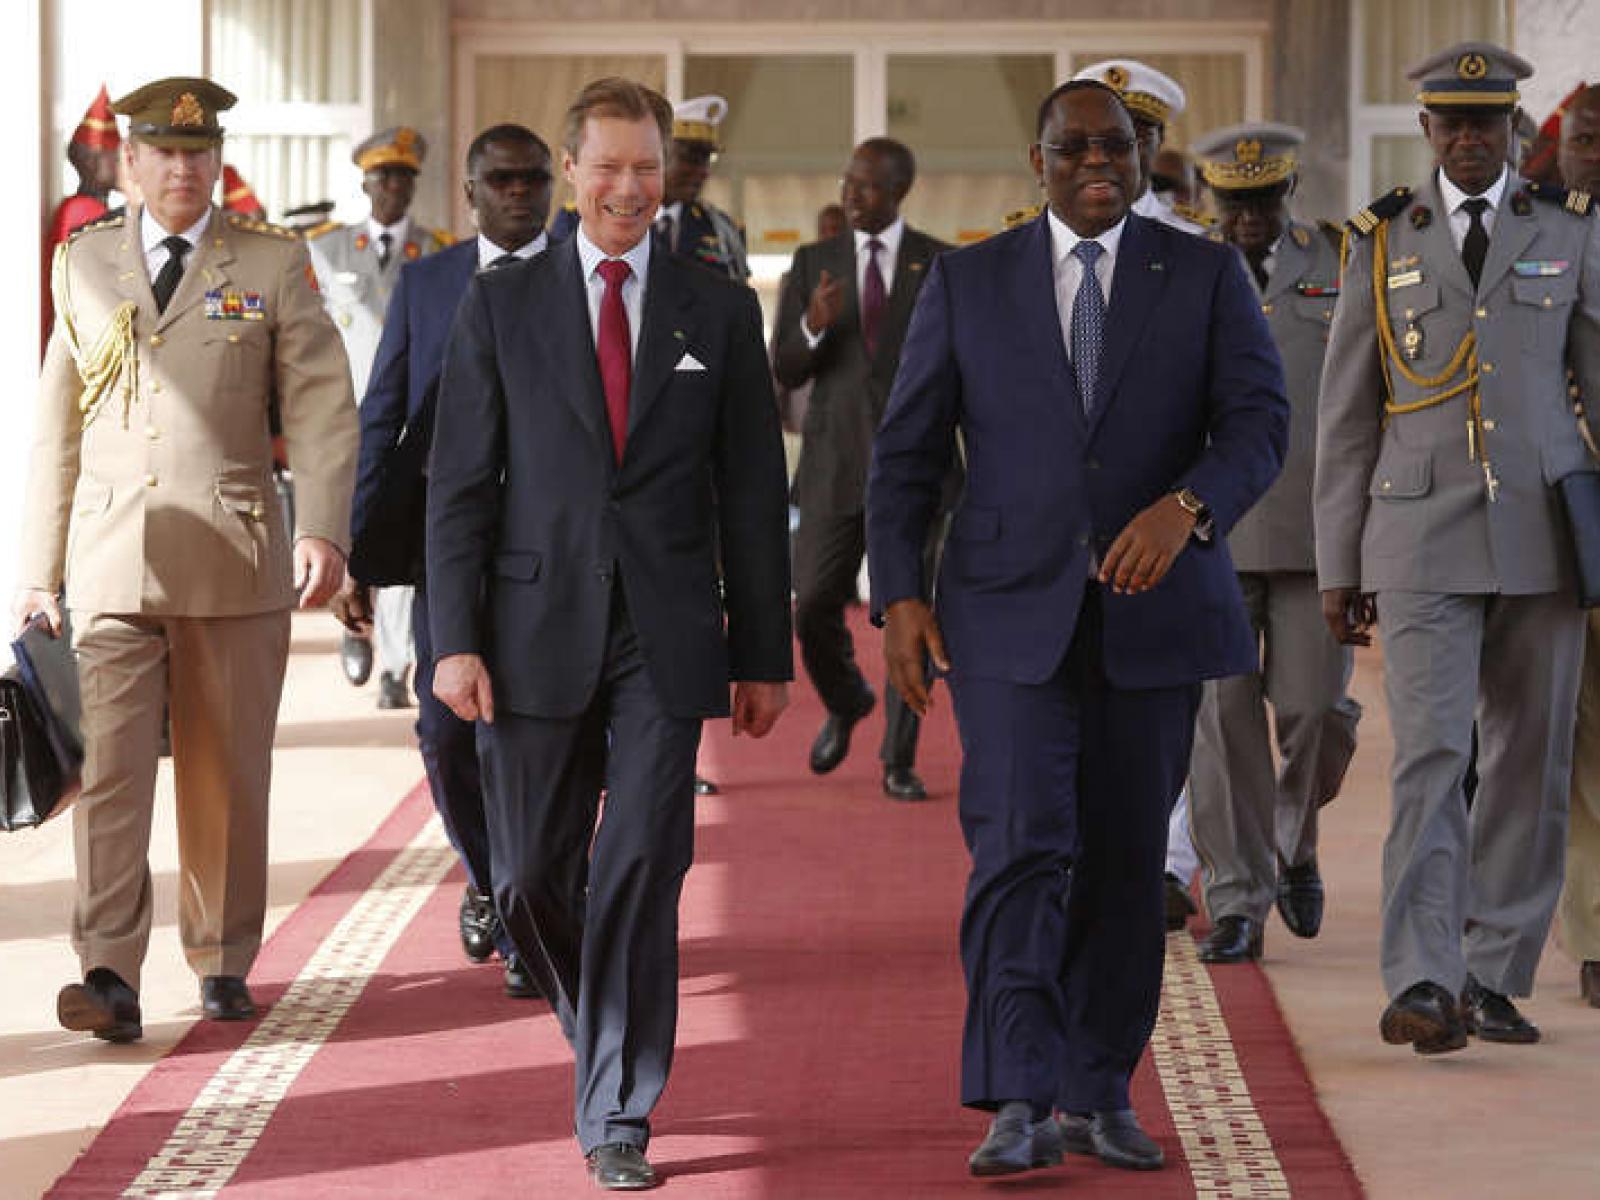 H.R.H. the Grand Duke and H.E. the President of the Republic of Senegal, Mr Macky Sall 